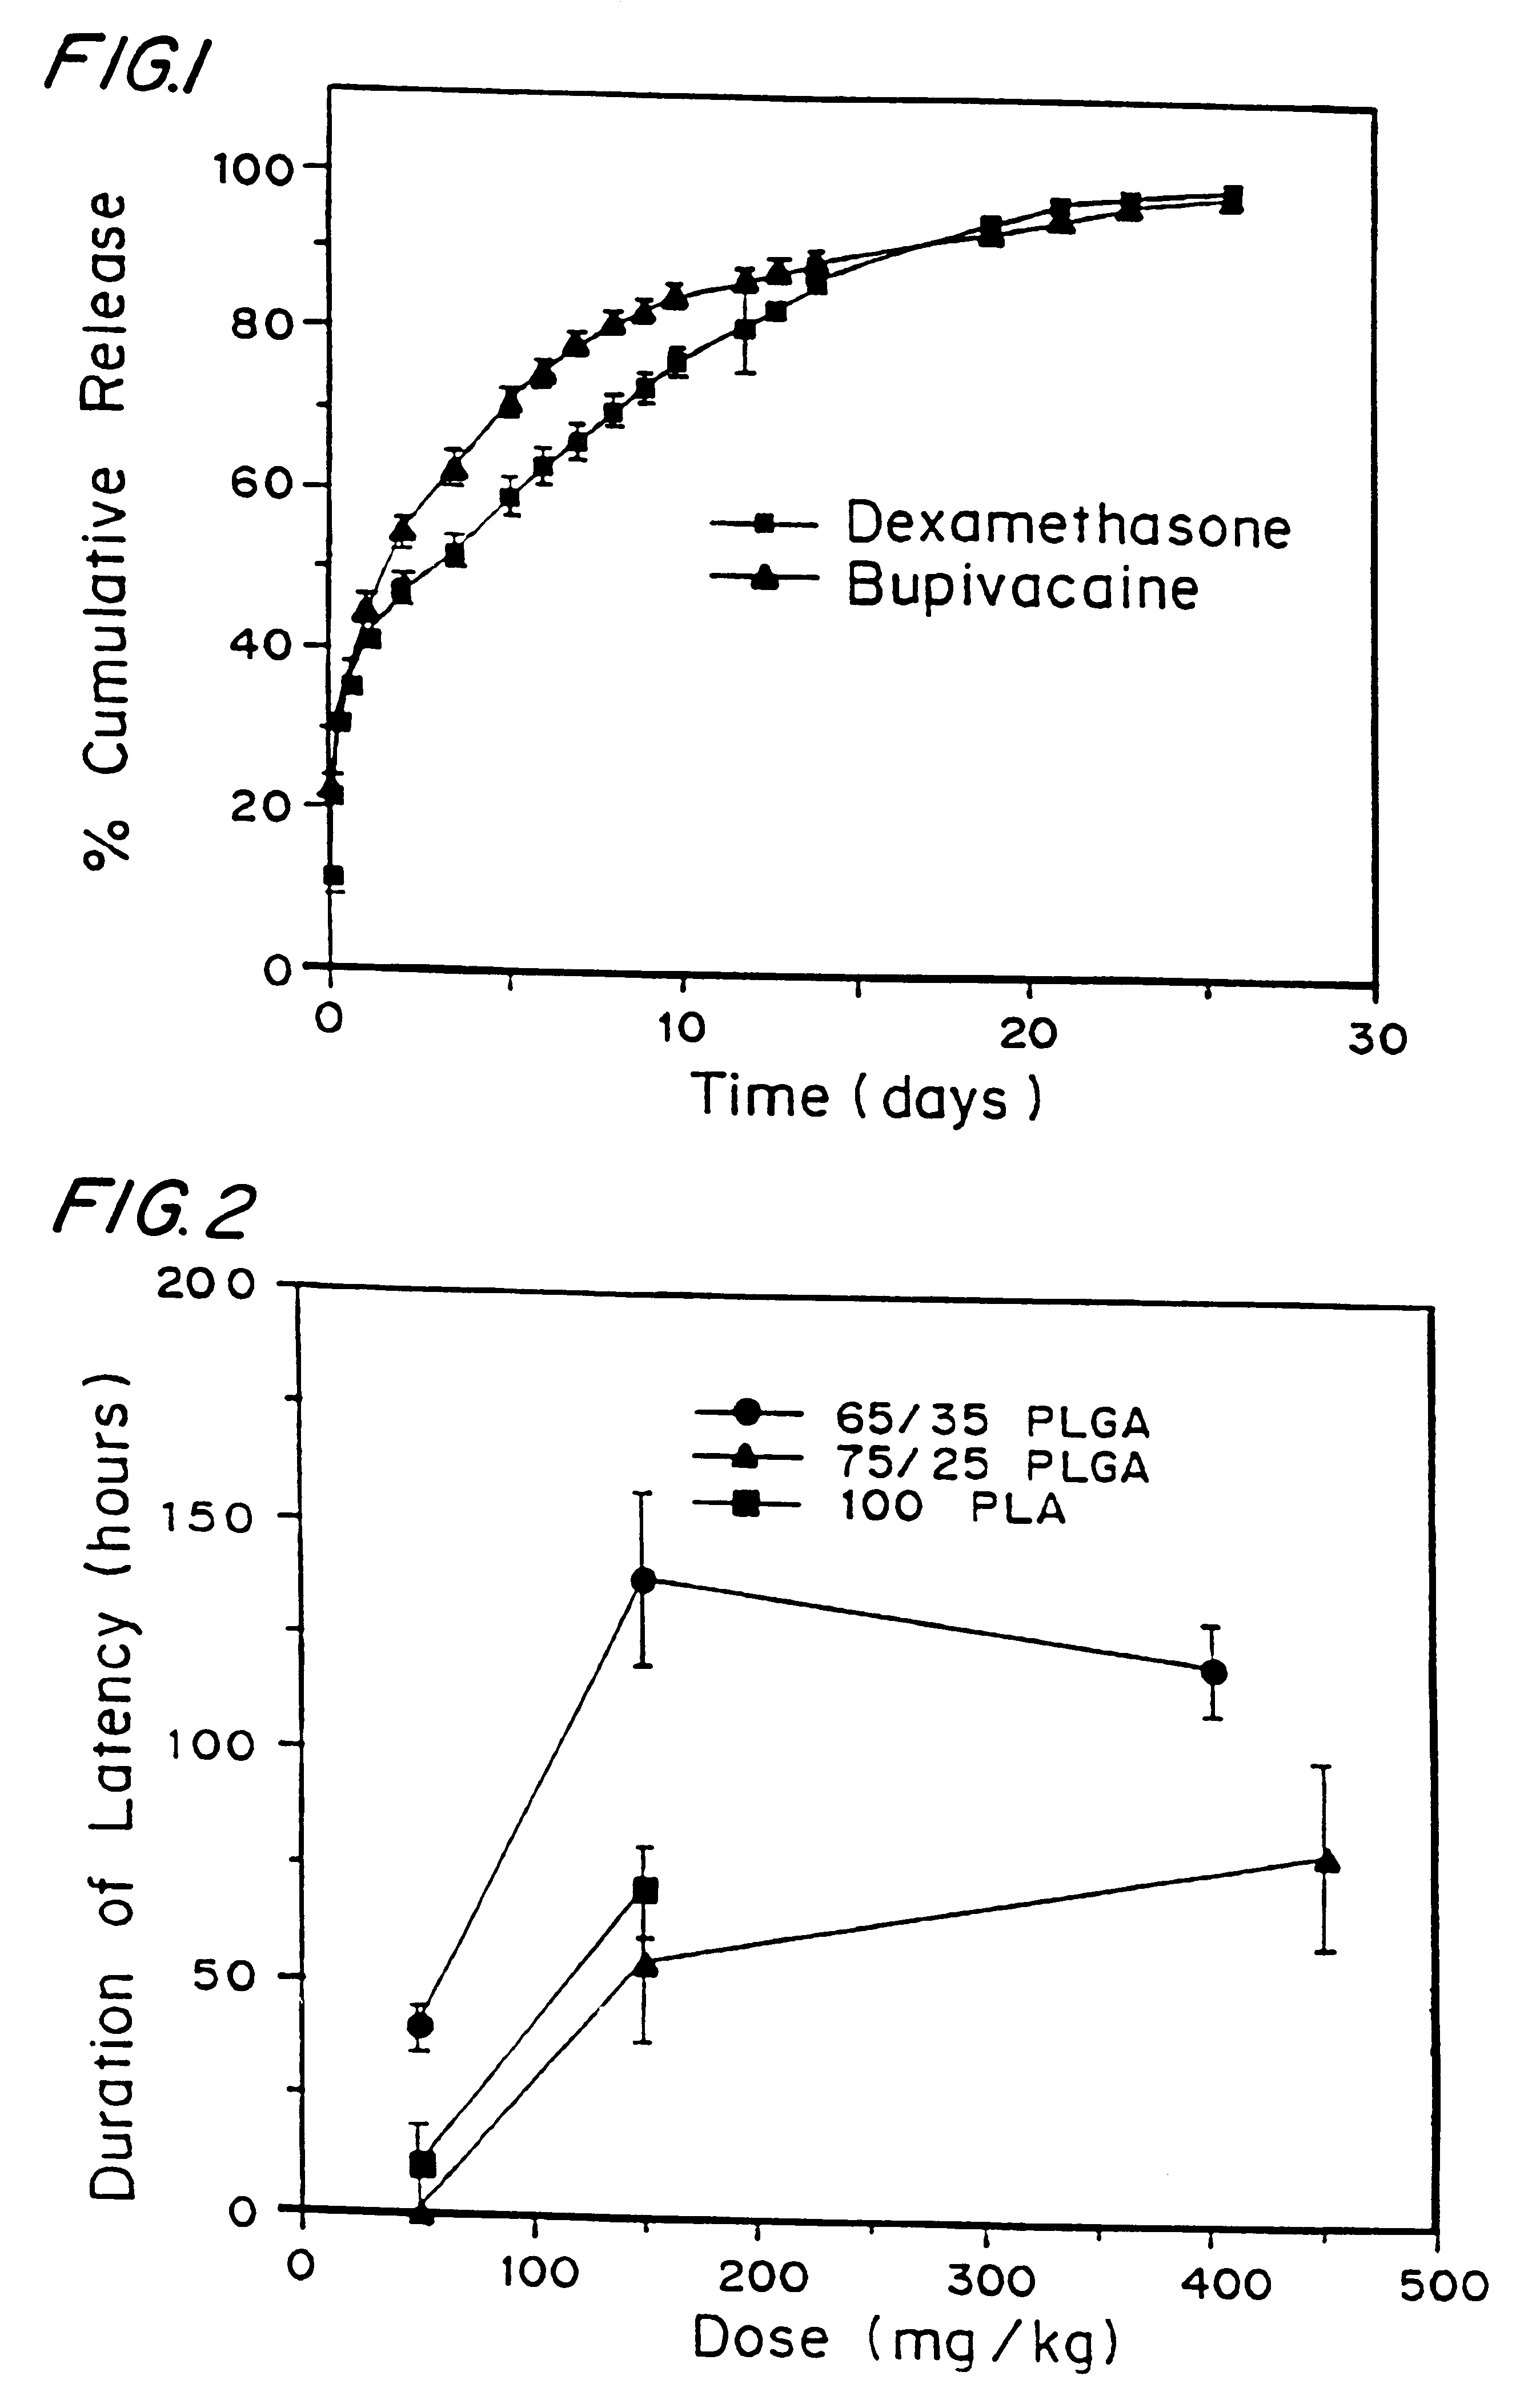 High load formulations and methods for providing prolonged local anesthesia